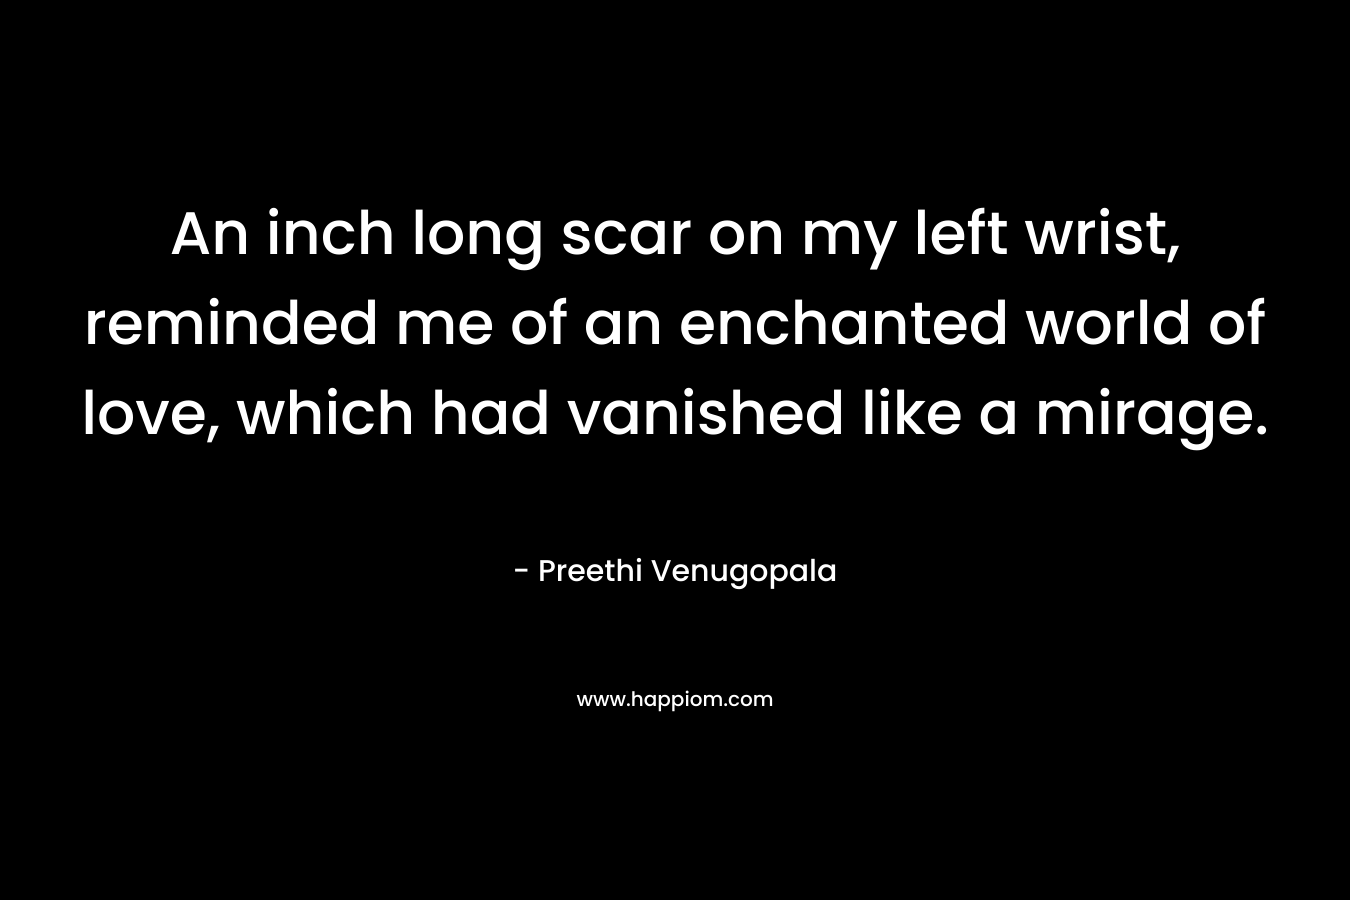 An inch long scar on my left wrist, reminded me of an enchanted world of love, which had vanished like a mirage. – Preethi Venugopala